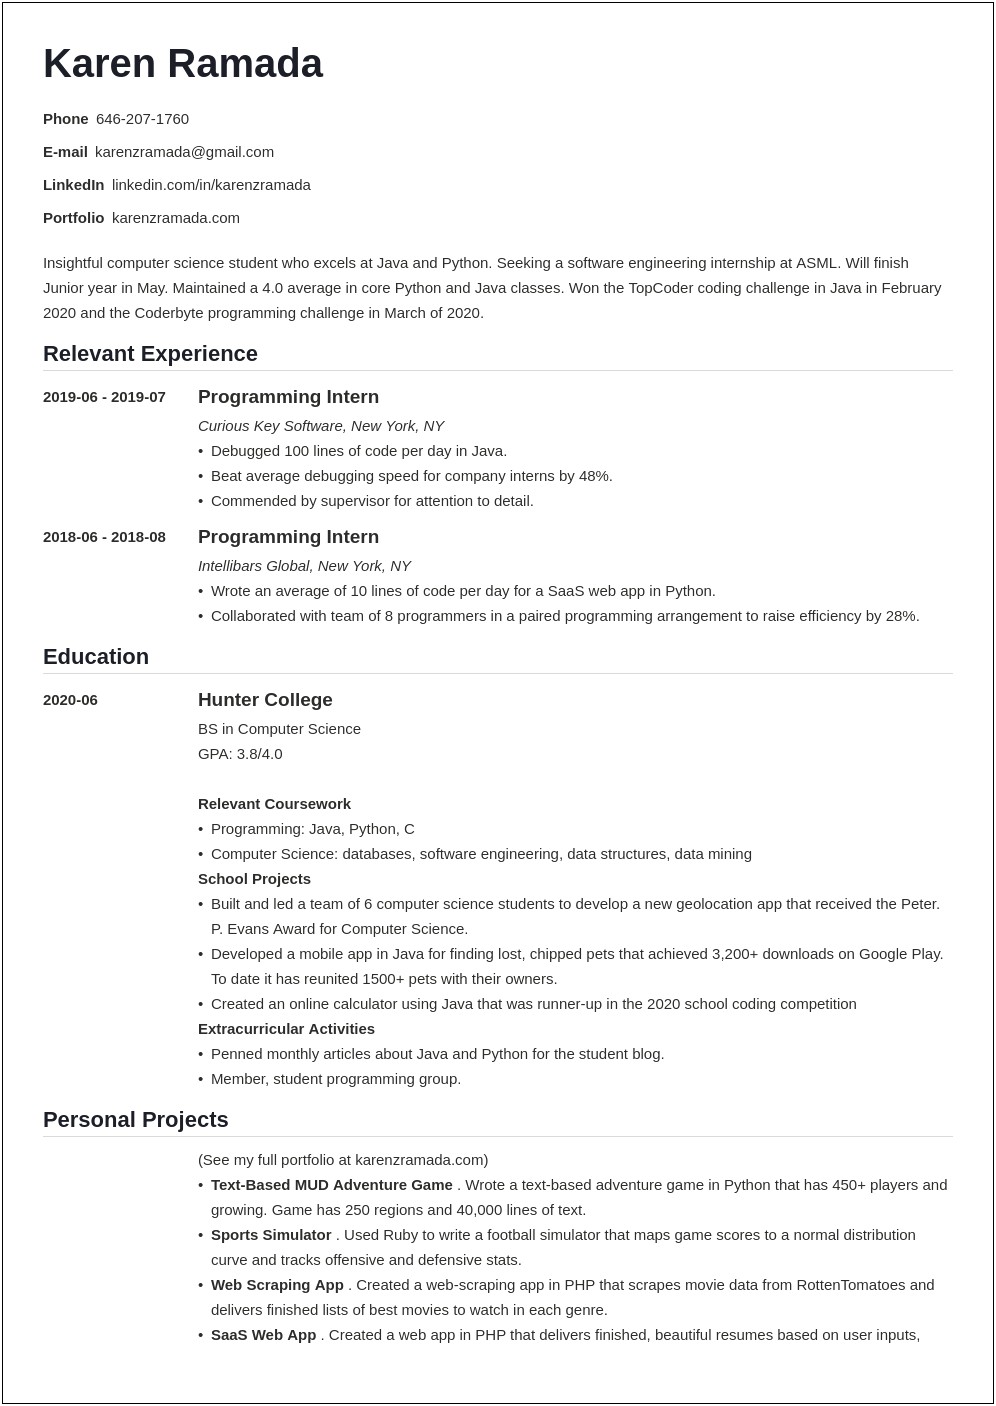 Sample Resume Objective For Ojt Engineering Students